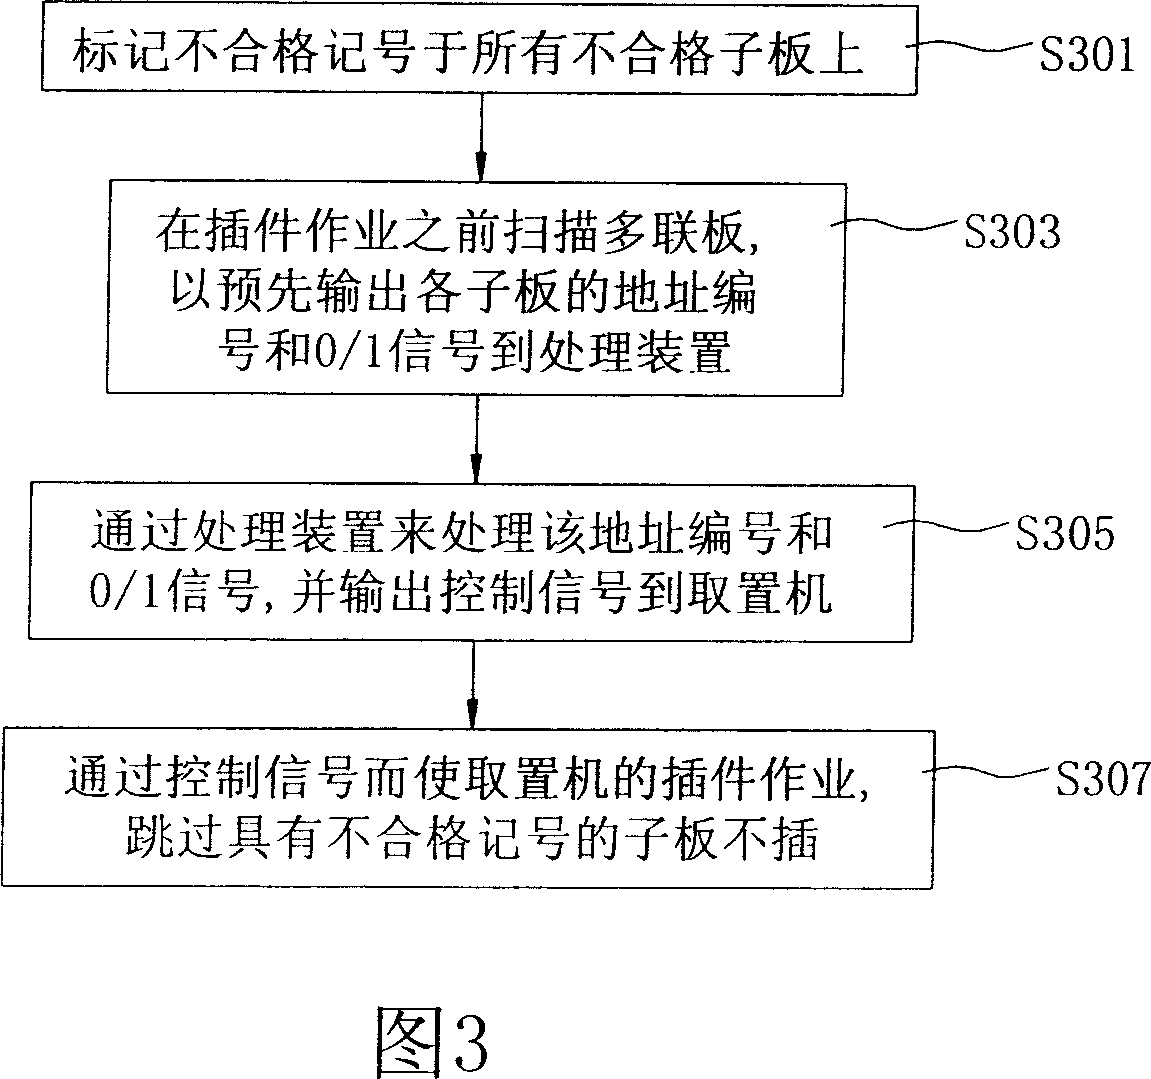 Multi-connecting board bad-product detecting device and method